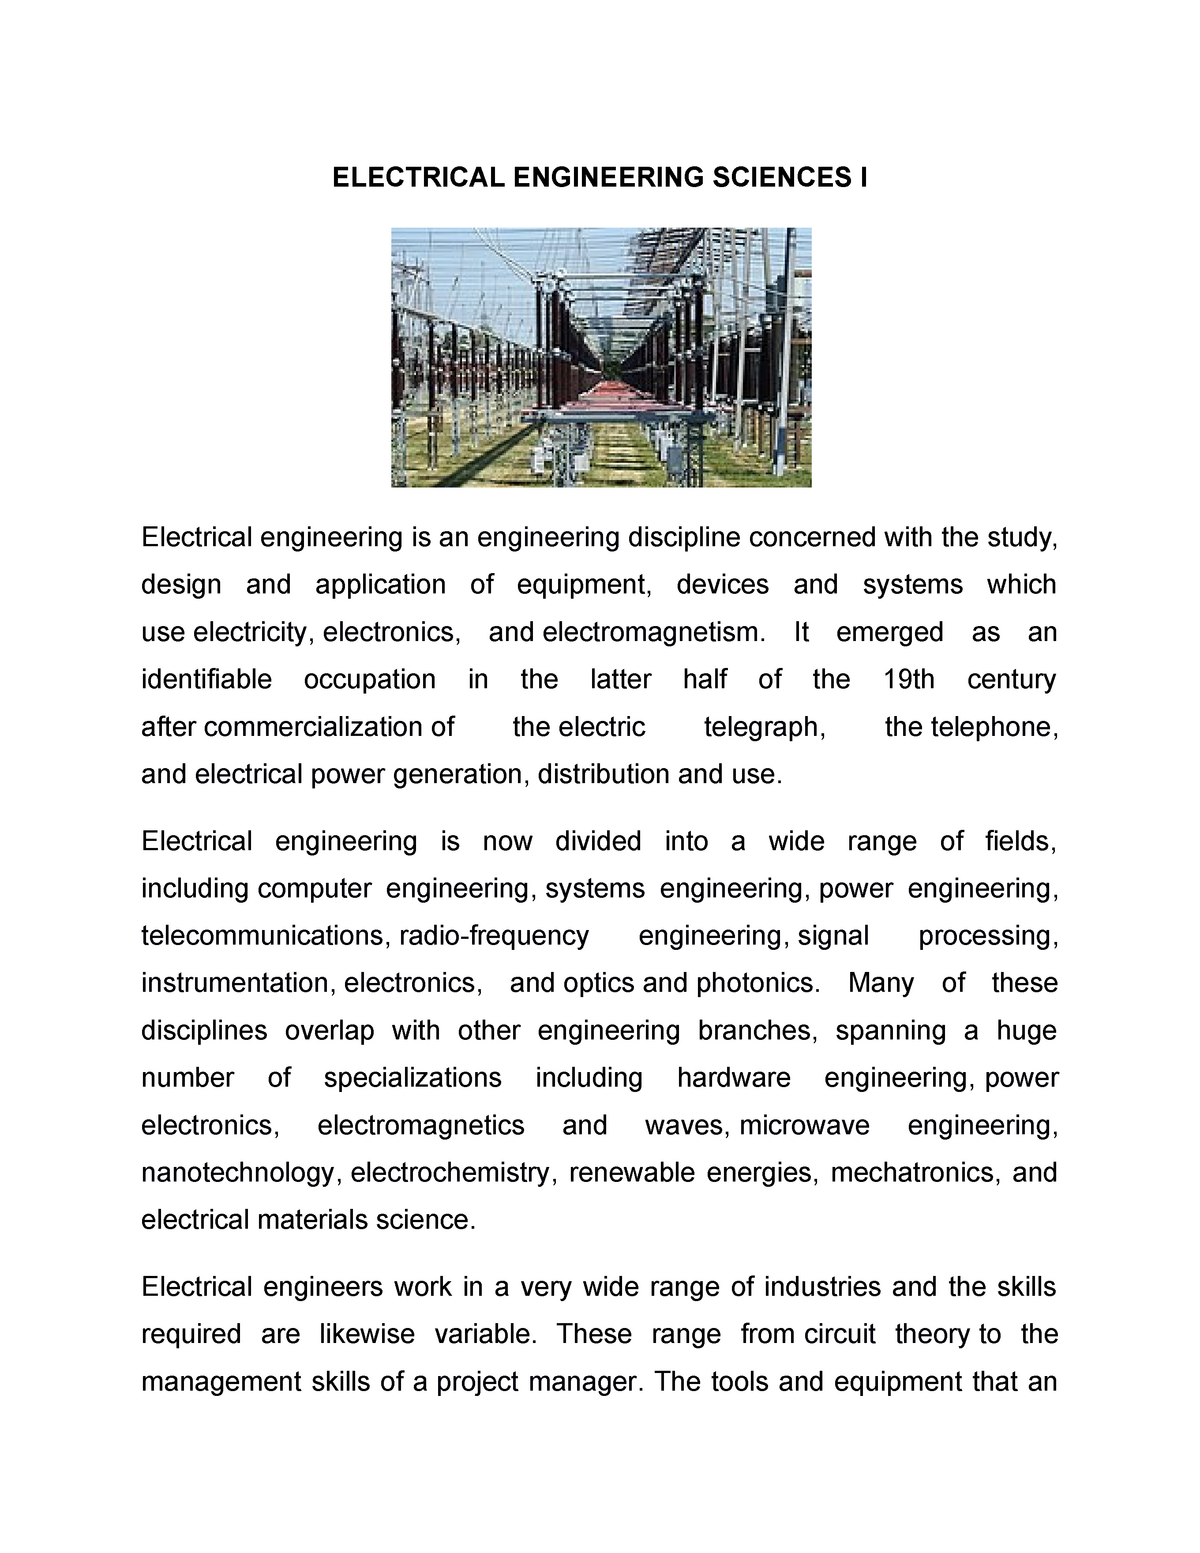 college essay about electrical engineering